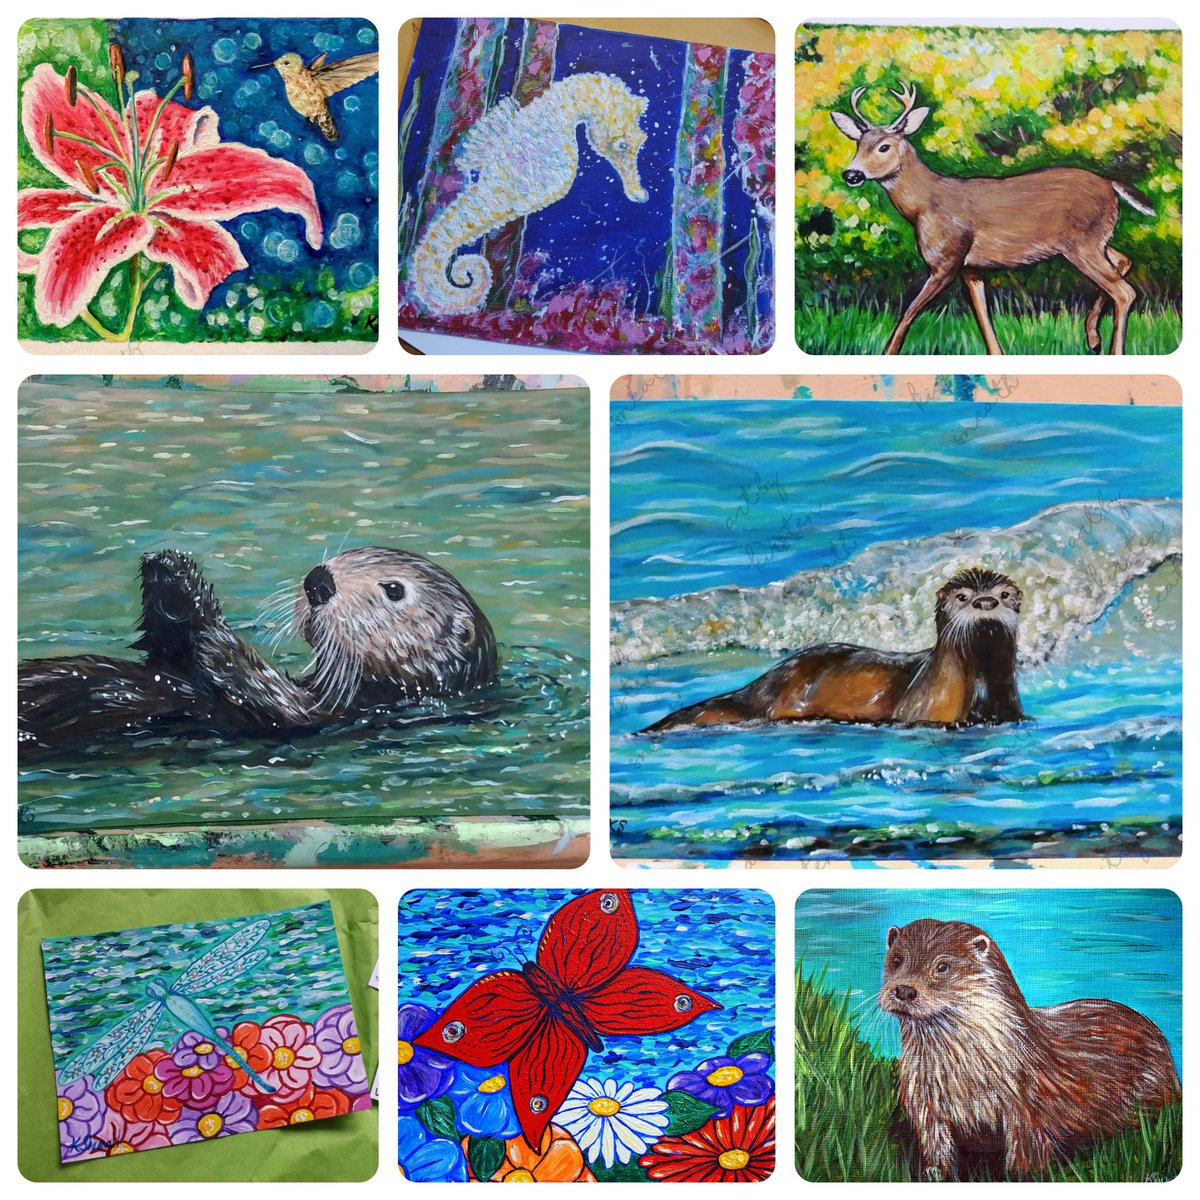 Just registered for my 9th year taking part in the Postcard Art Exhibit #PAE2024 (previously Twitter Art Exhibit ~ TAE) Here are all my previous entries. Who else has registered? What will I paint this year?! Love this #artforacause #postcardartexhibit24 postcardartexhibit.com/event-details/…